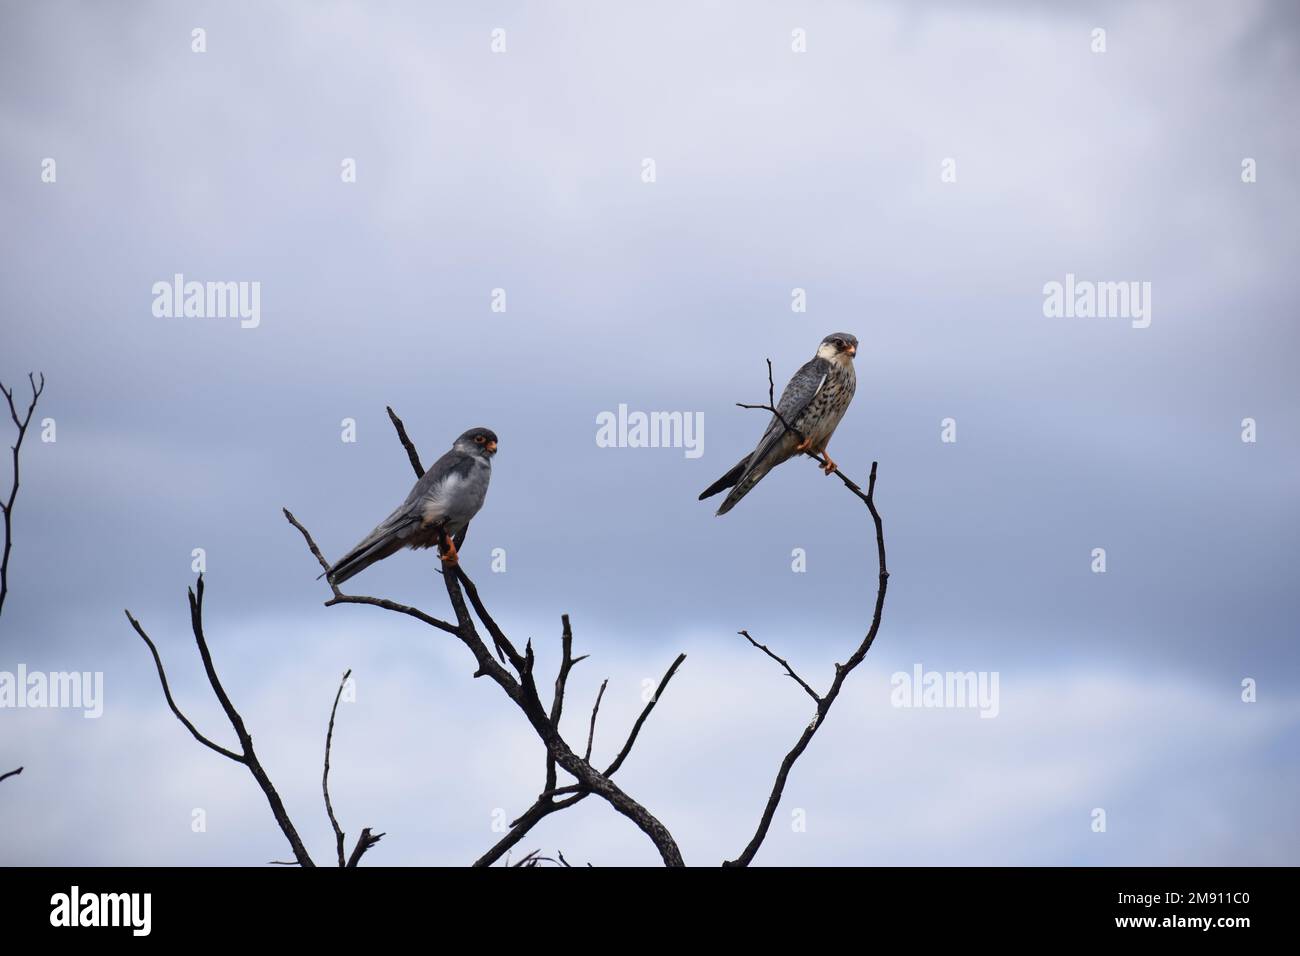 Couple of Amur Falcons at the end summer migration to South Africa, preparing return to Asia. Female has white underparts with dark chevrons. Stock Photo